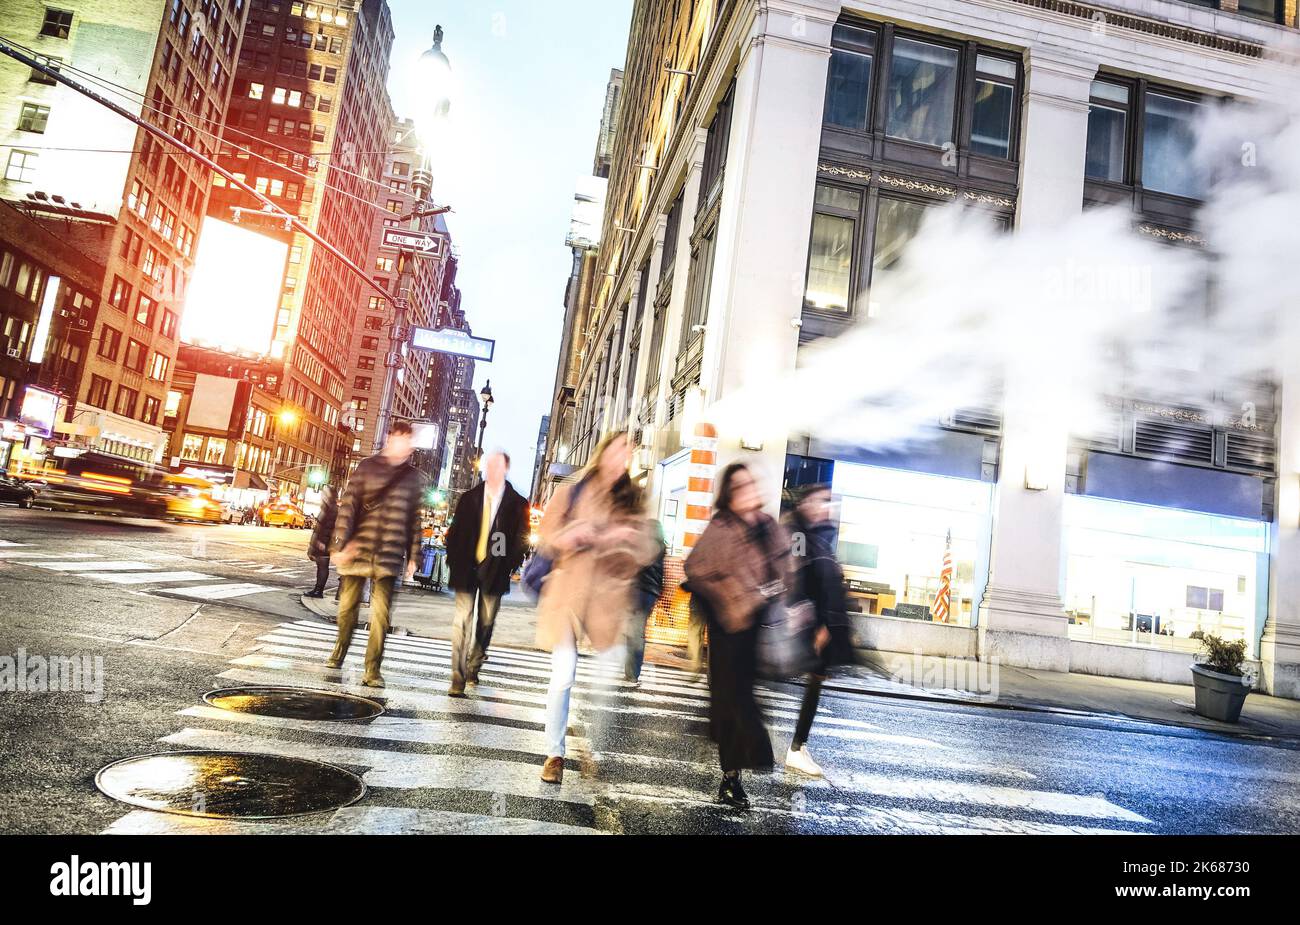 People walking on zebra crossing on West 31th st in Manhattan - Crowded streets of New York City during rush hour in urban business area - Warm desaur Stock Photo